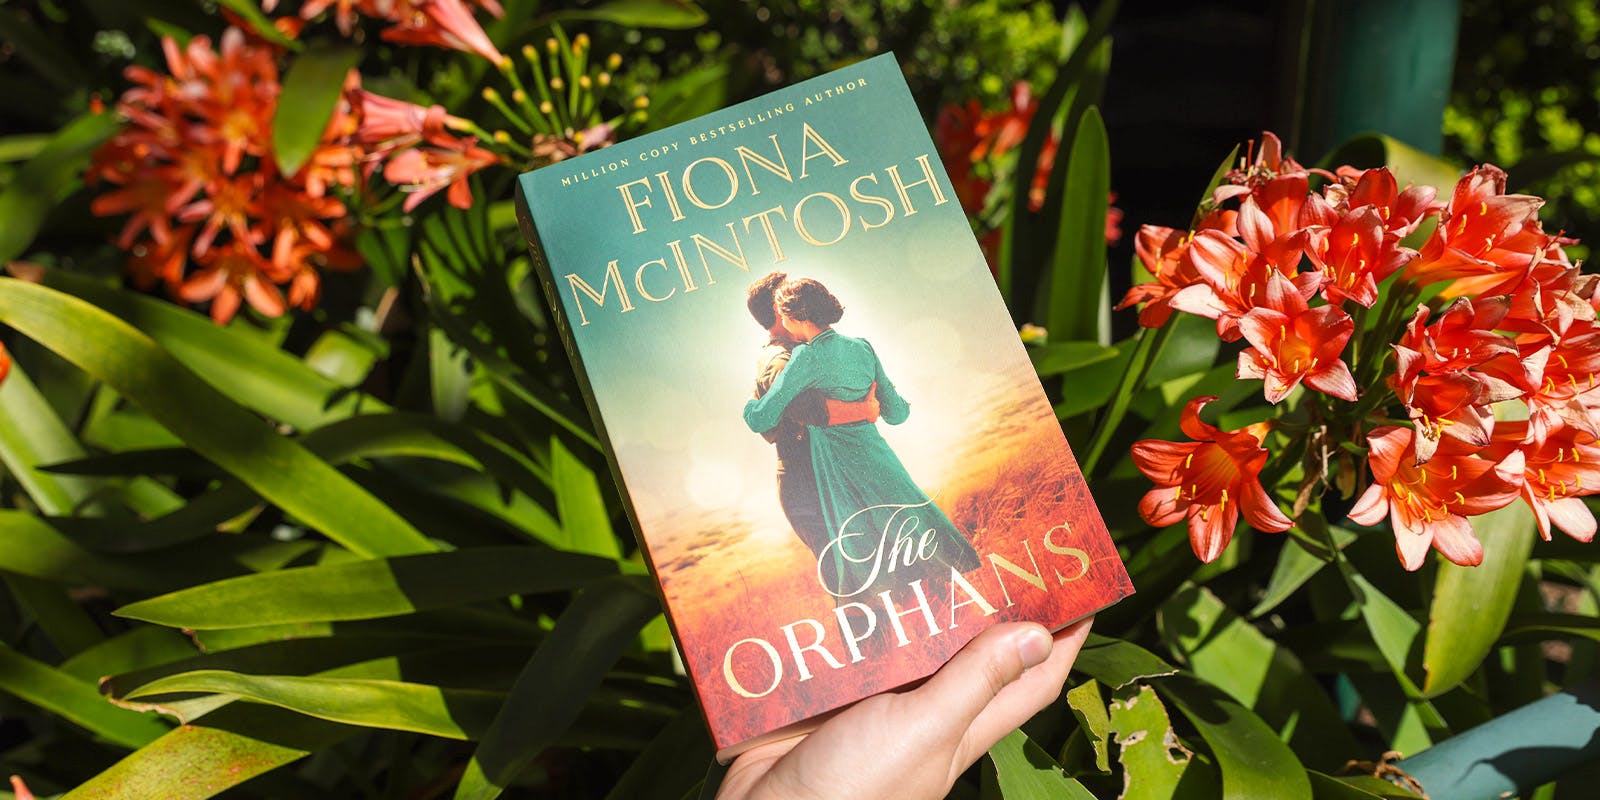 Podcast: The story behind Fiona McIntosh's newest book